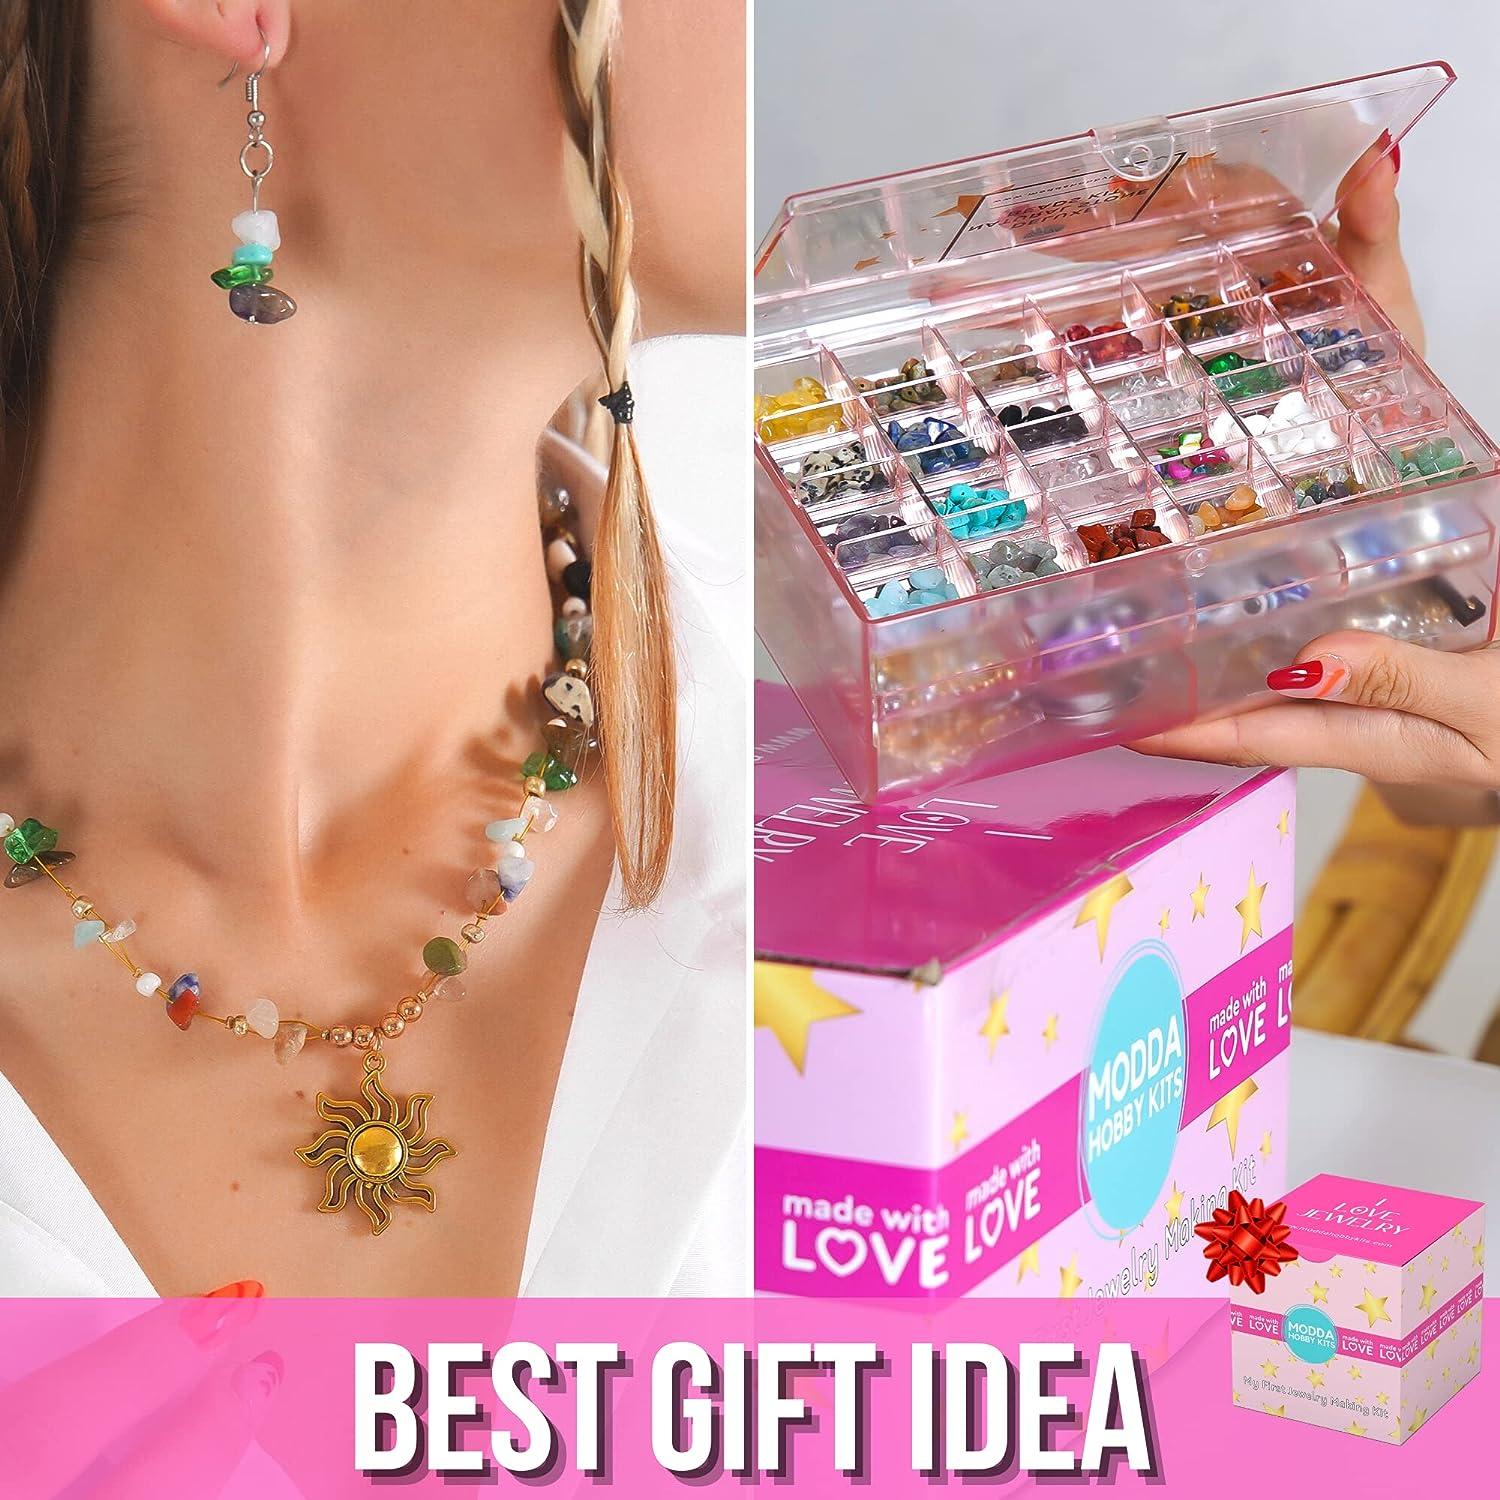 Jewelry Making Kit With Video Course for Making Bracelets, Necklaces,  Earrings, DIY Starter Set for Adults, Women, Teenage Girls, Beginners 